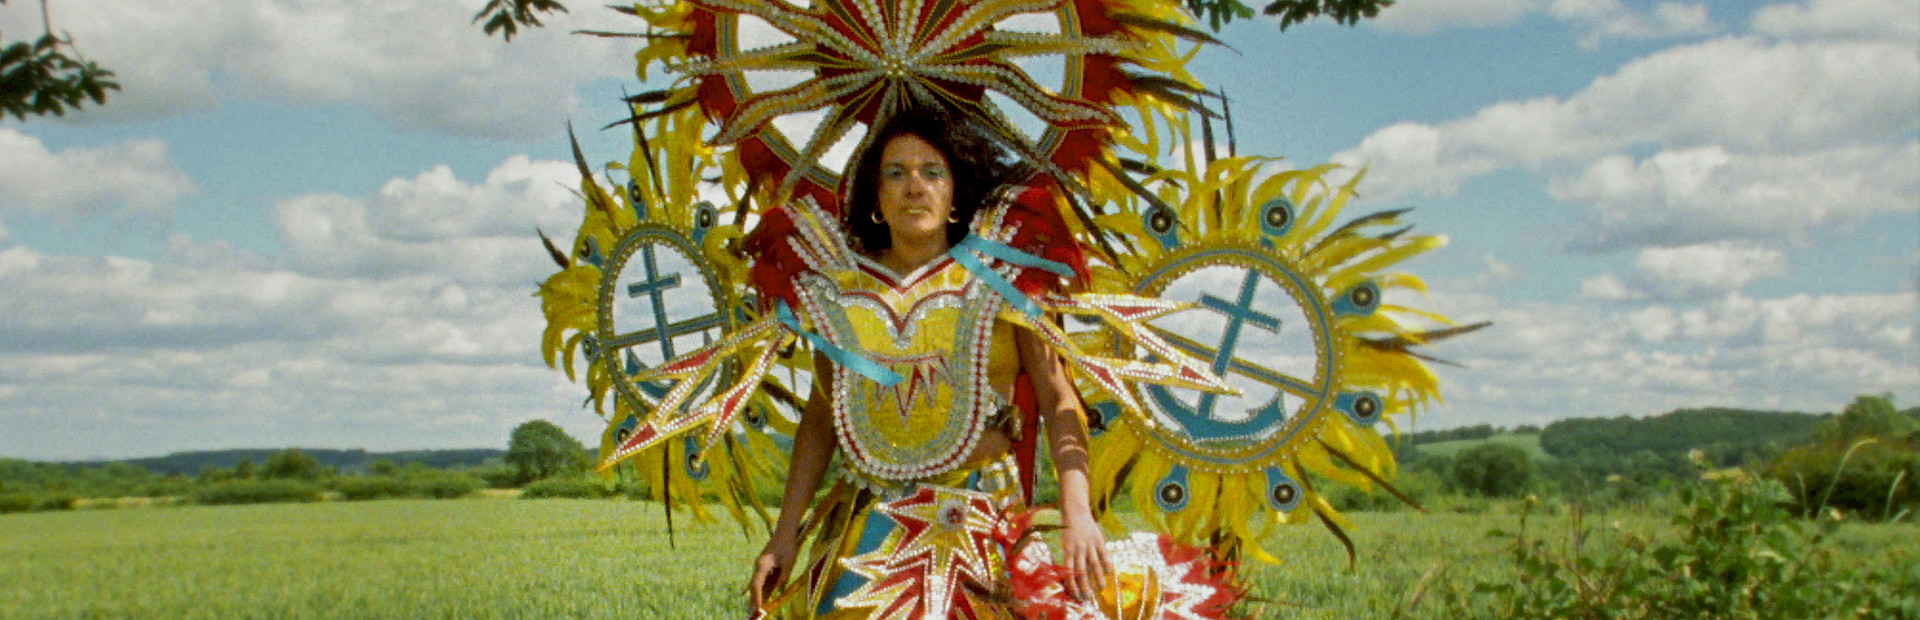 Film still of Rhea Storr's 'A Protest, A Celebration, A Mixed Message' depicting a woman wearing a large, colorful Carnival costume while standing on a wooden bench in front of a green field.